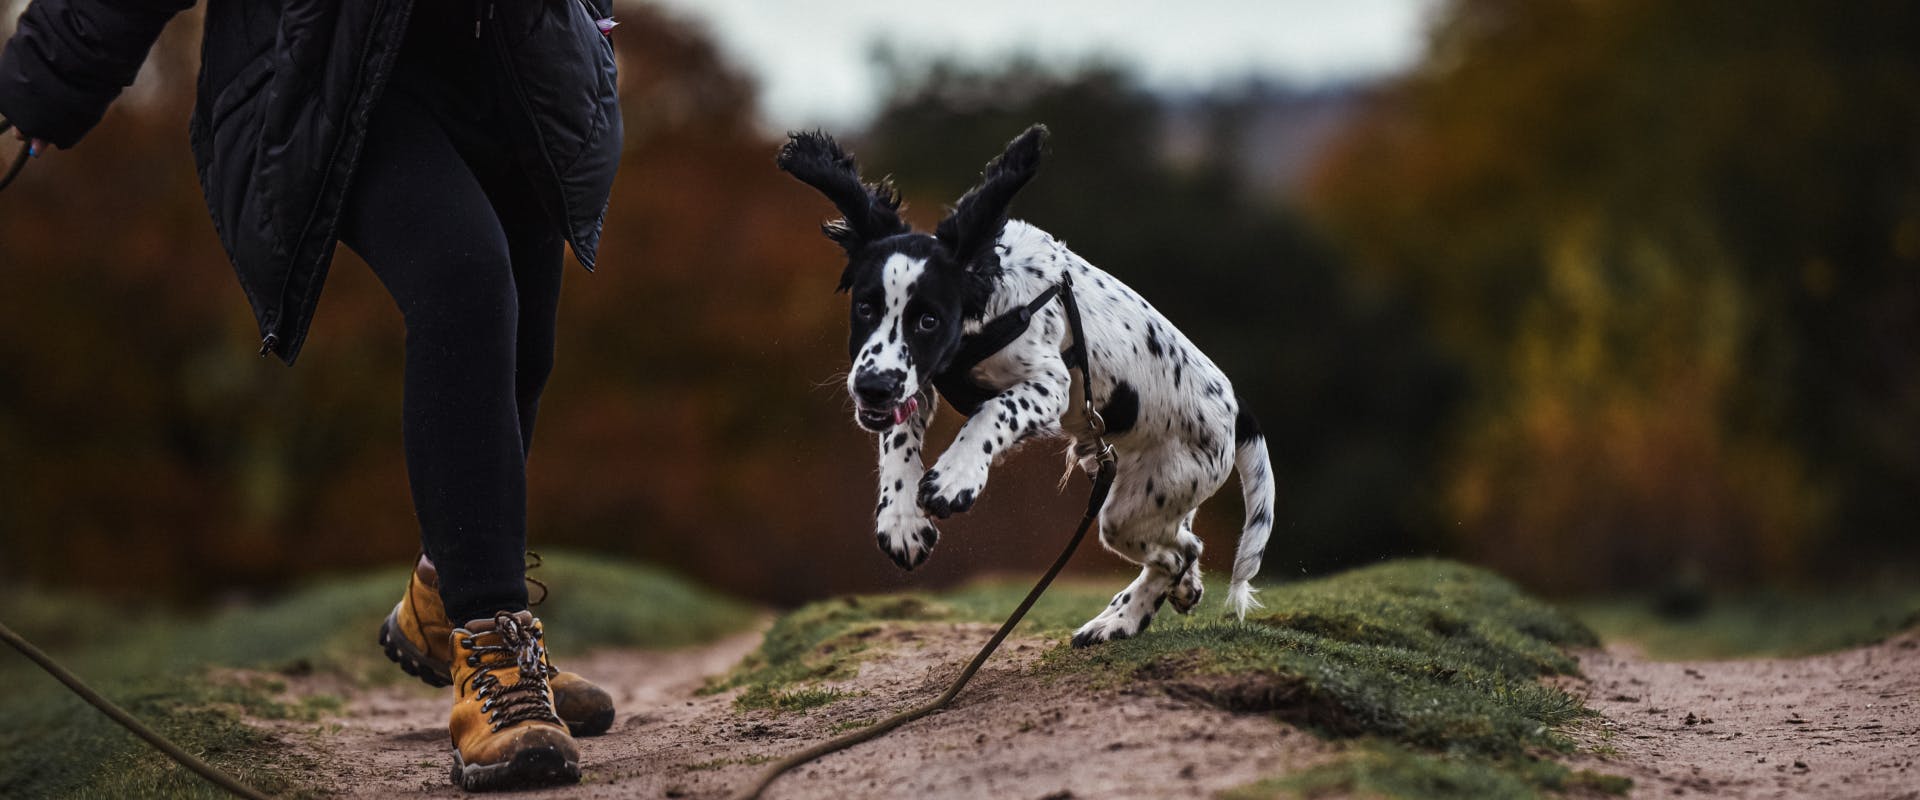 a black and white spaniel bouncing along a country path with a long hiking gear leash